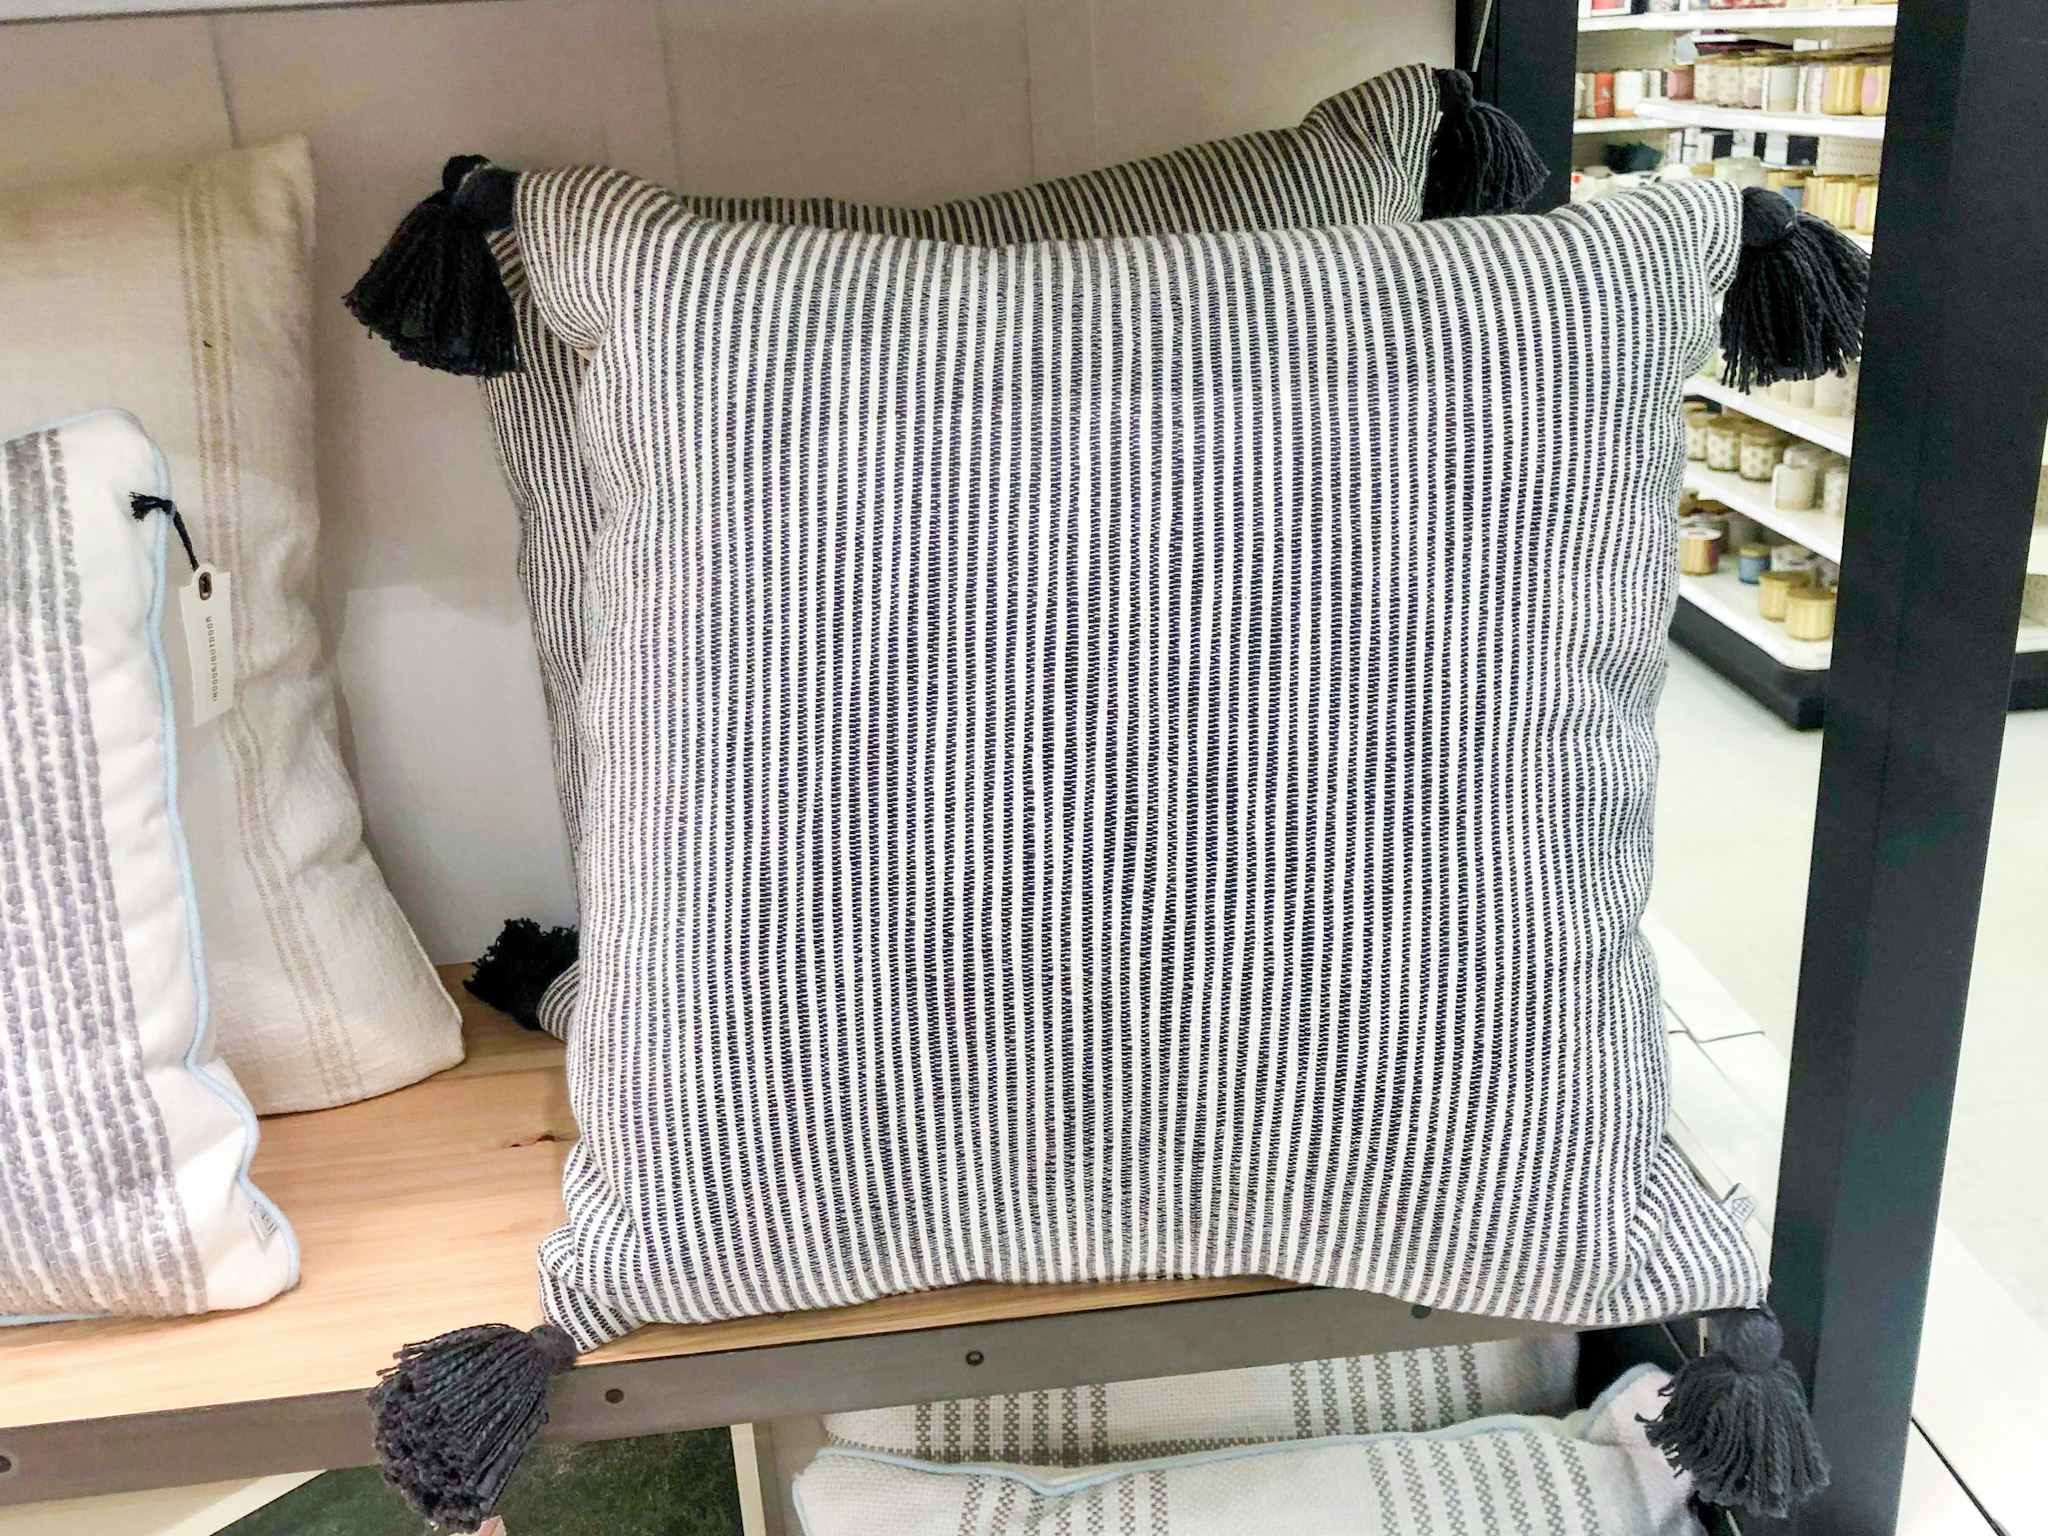 A black and white striped pillow on the shelf inside target